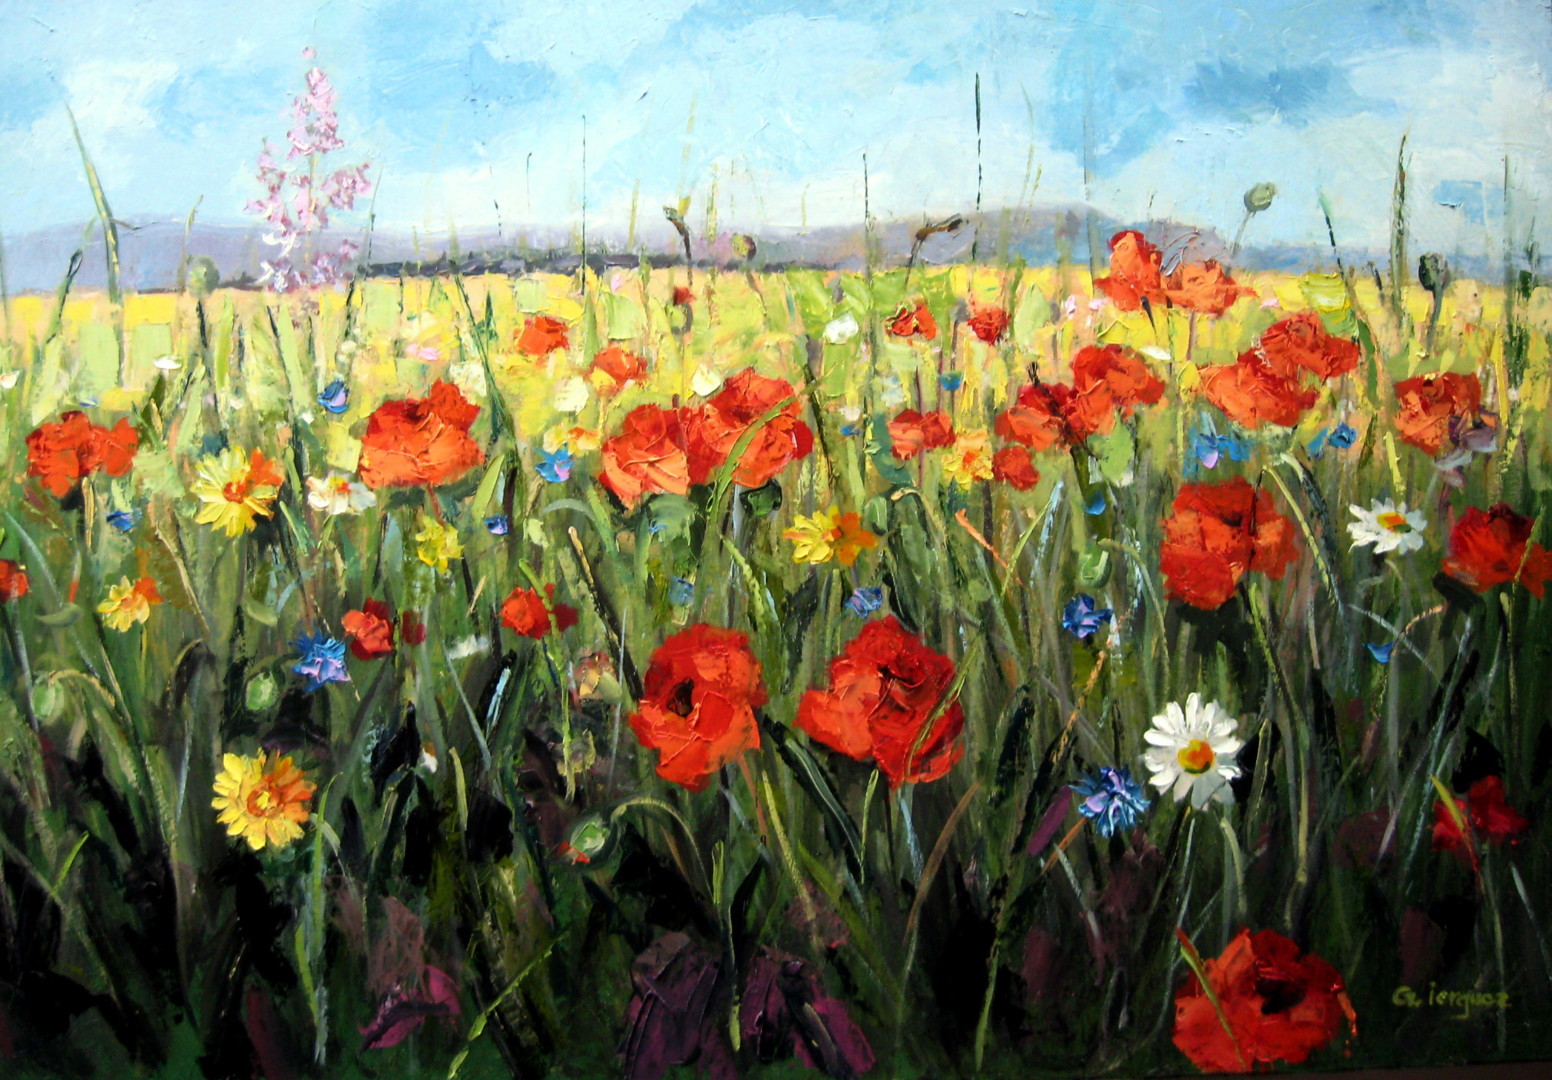 Field Of Flowers, Painting by Gheorghe Iergucz | Artmajeur